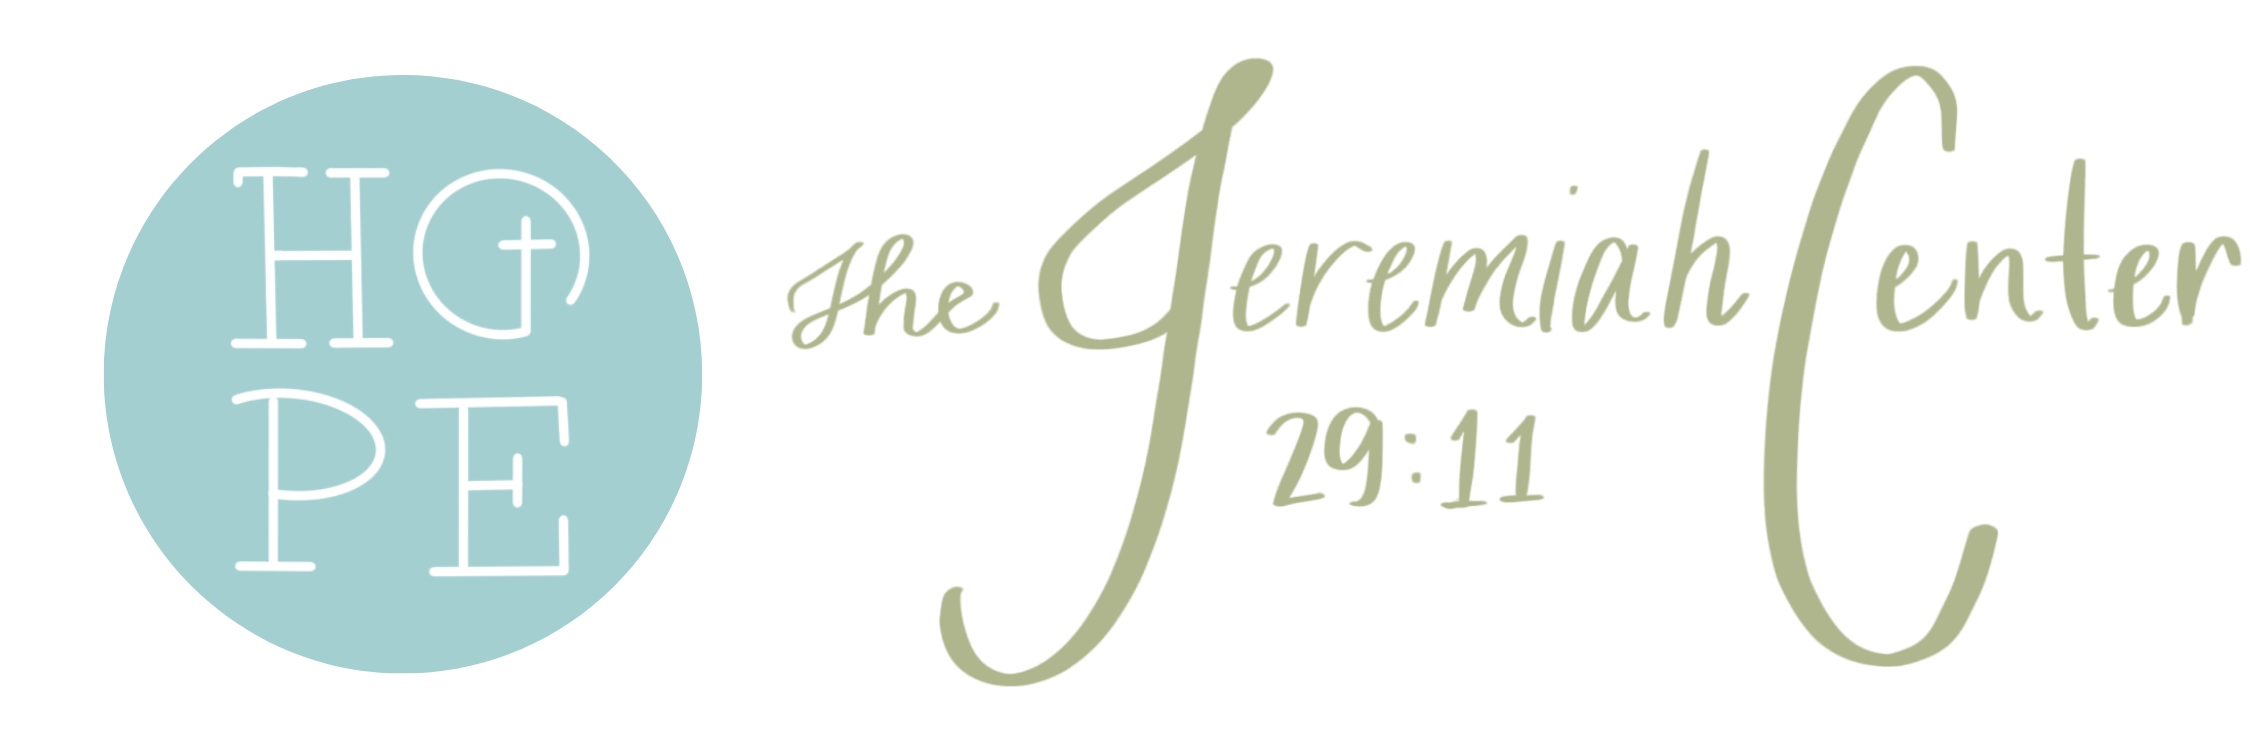 The Jeremiah Center